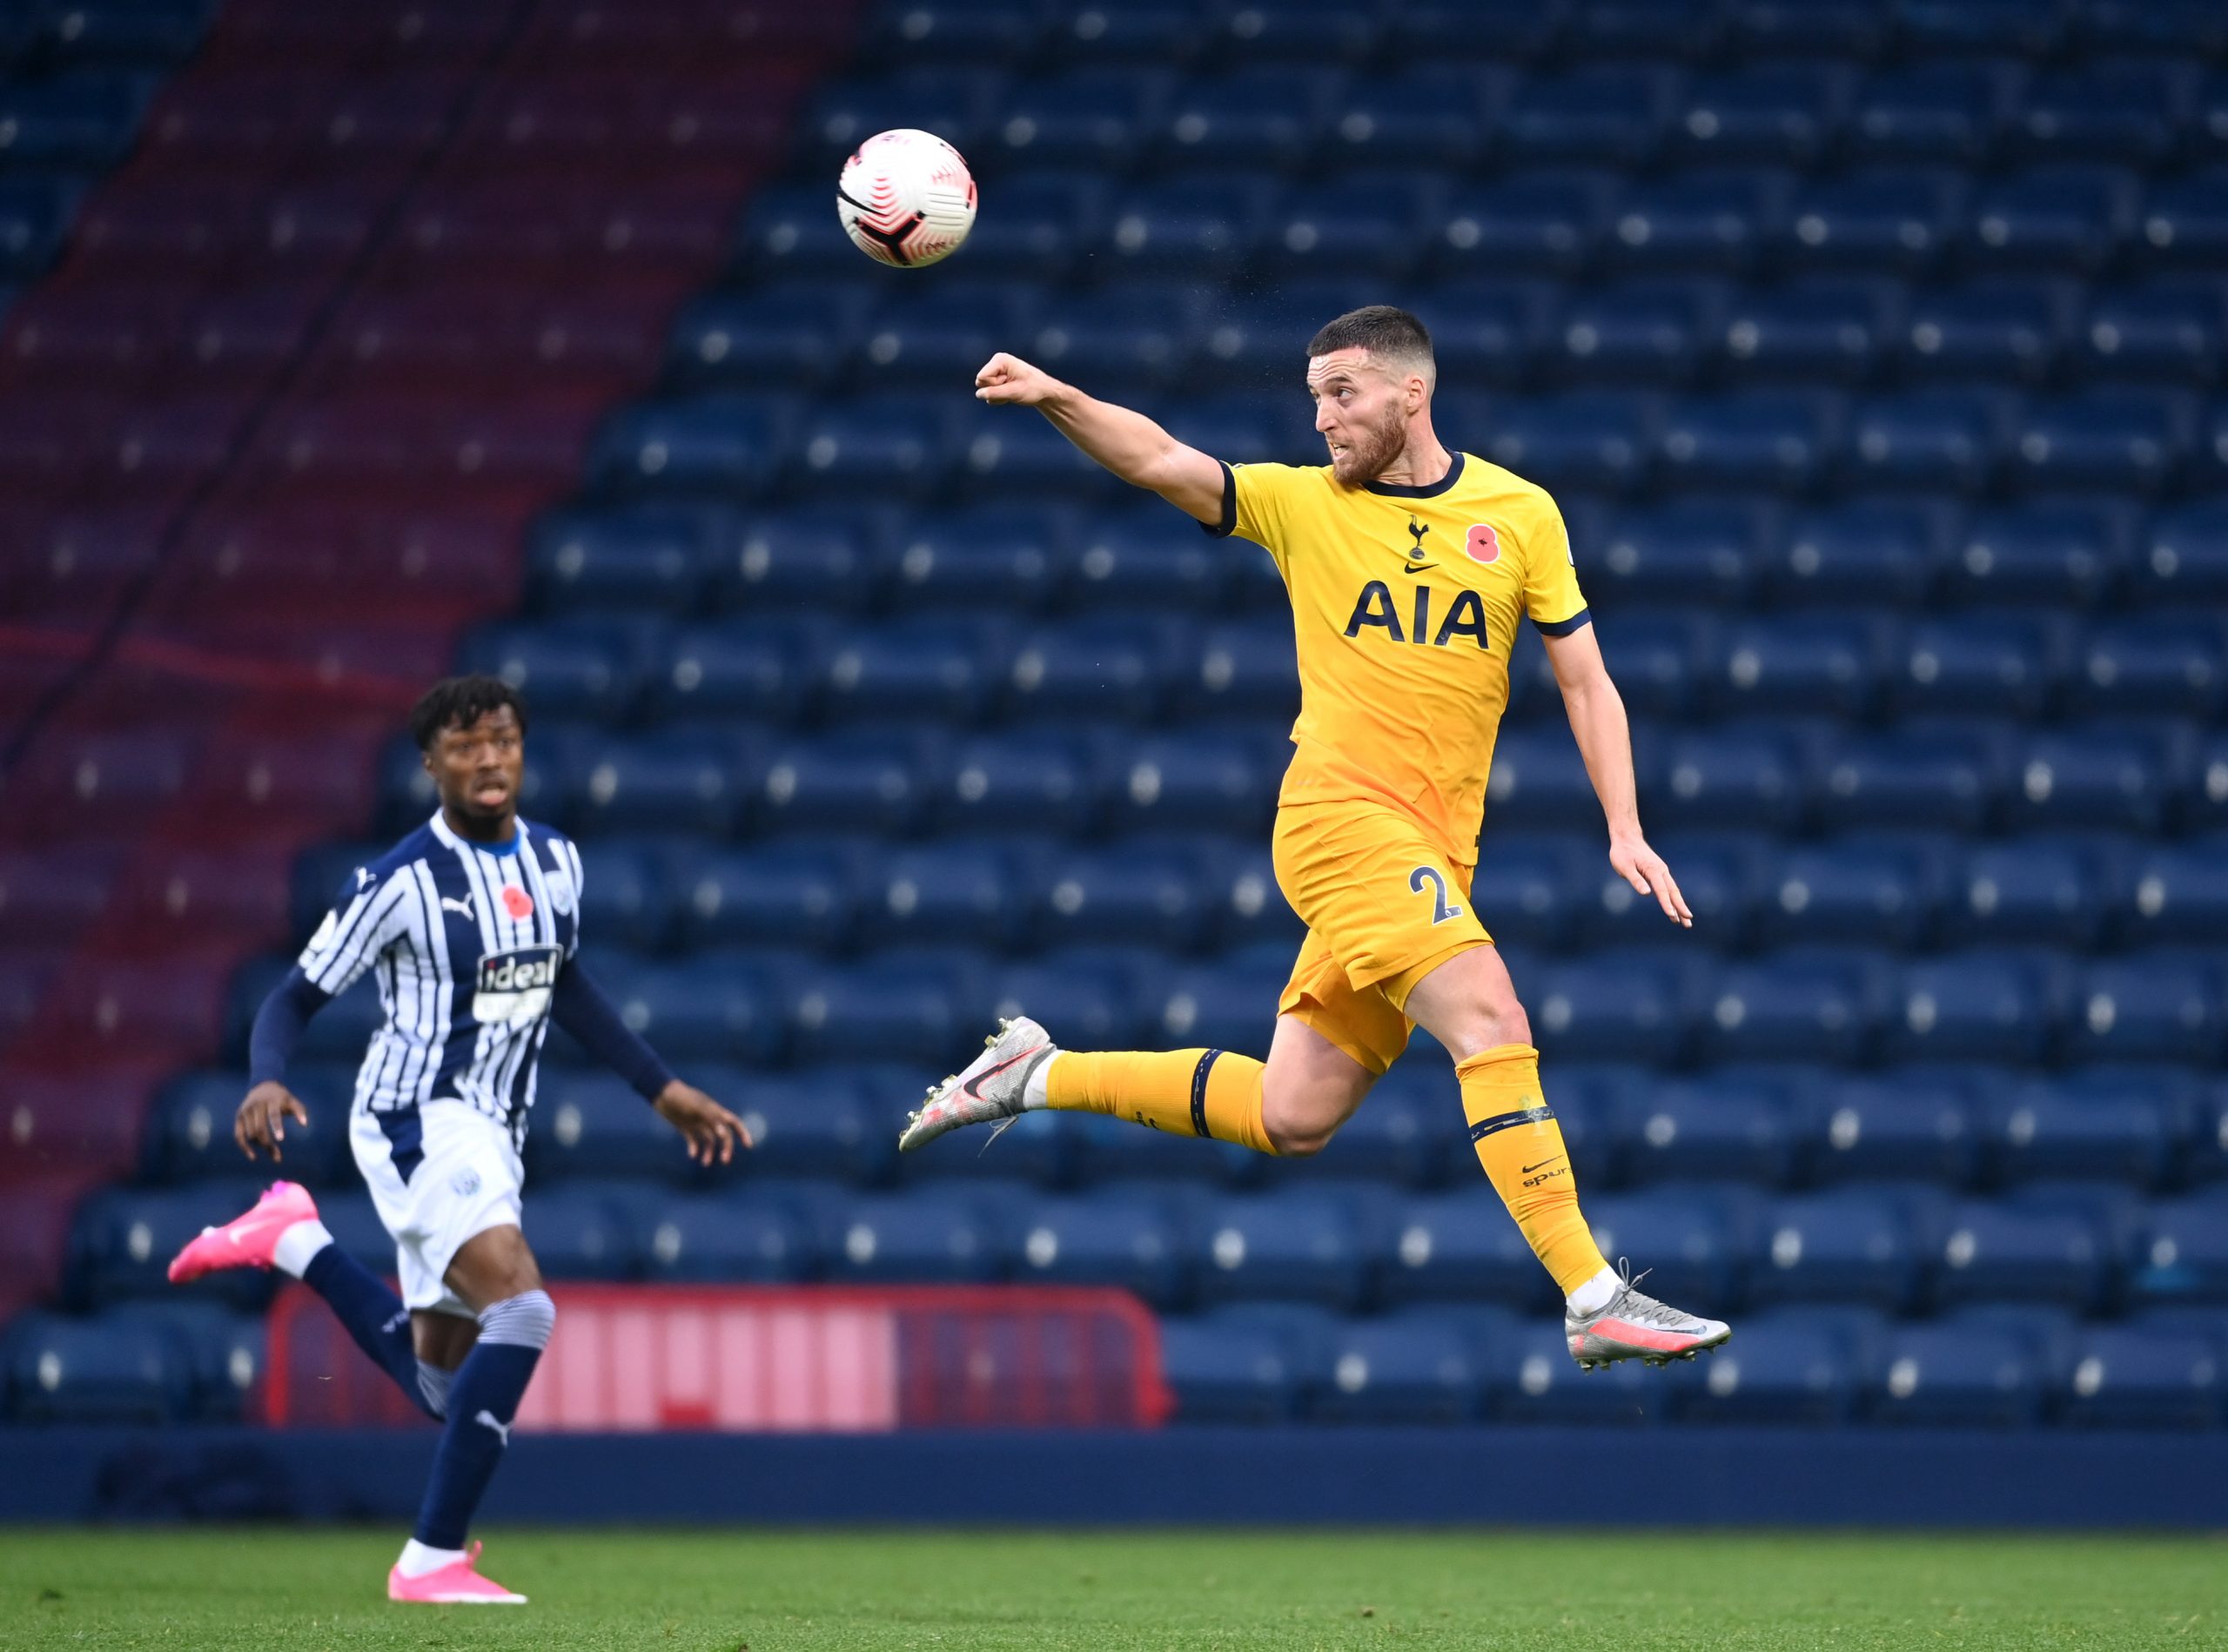 Matt Doherty of Tottenham Hotspur heads the ball during a game against West Bromwich Albion.